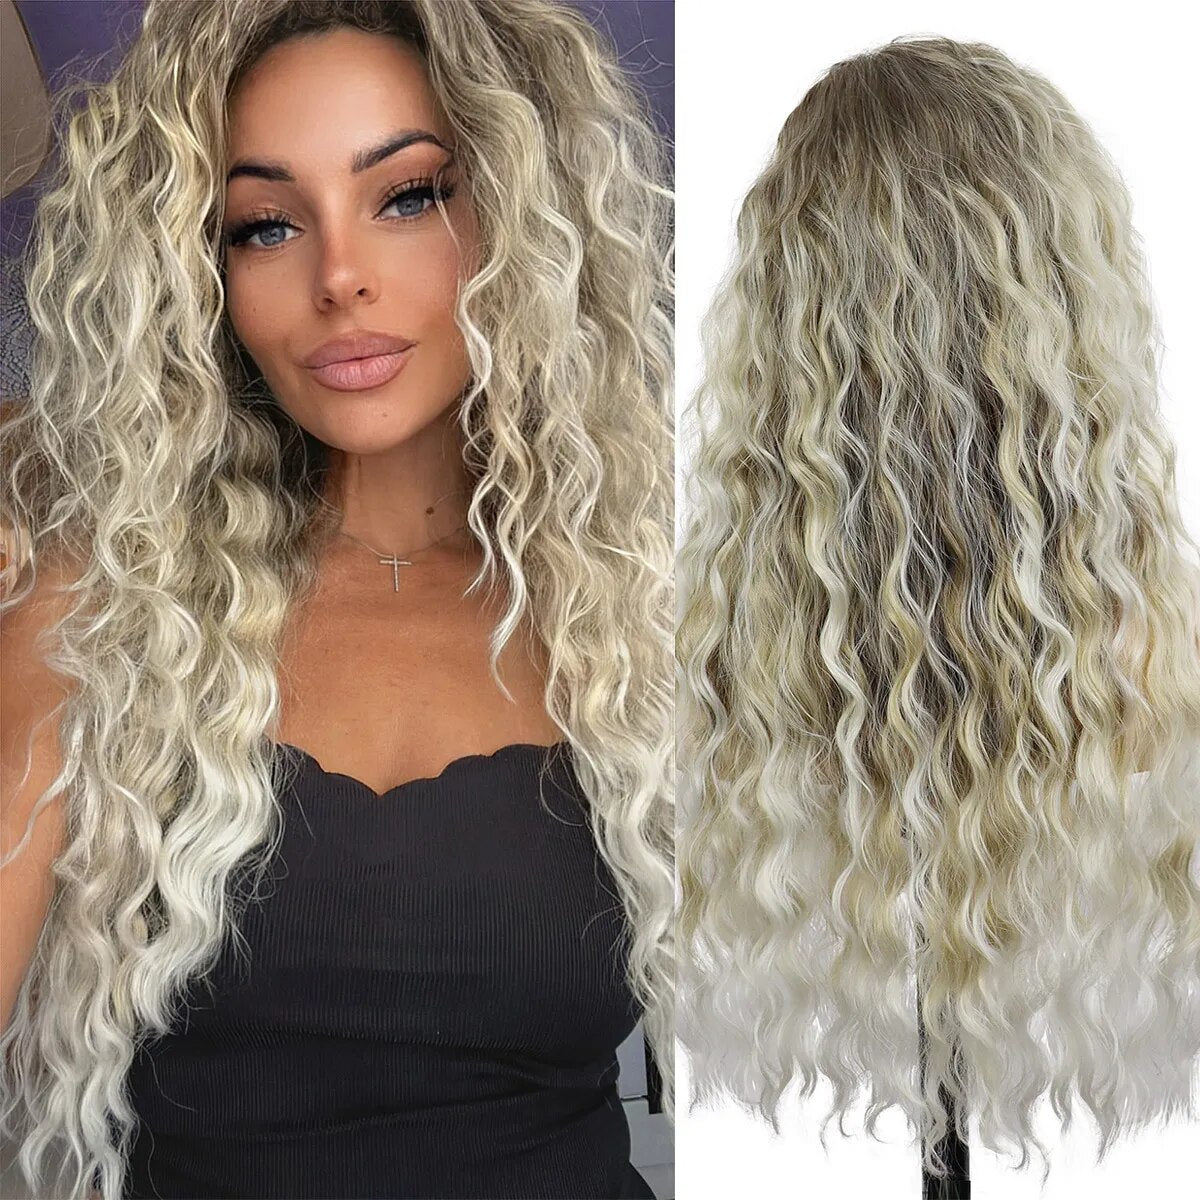 Synthetic Womens Long Curly Wig